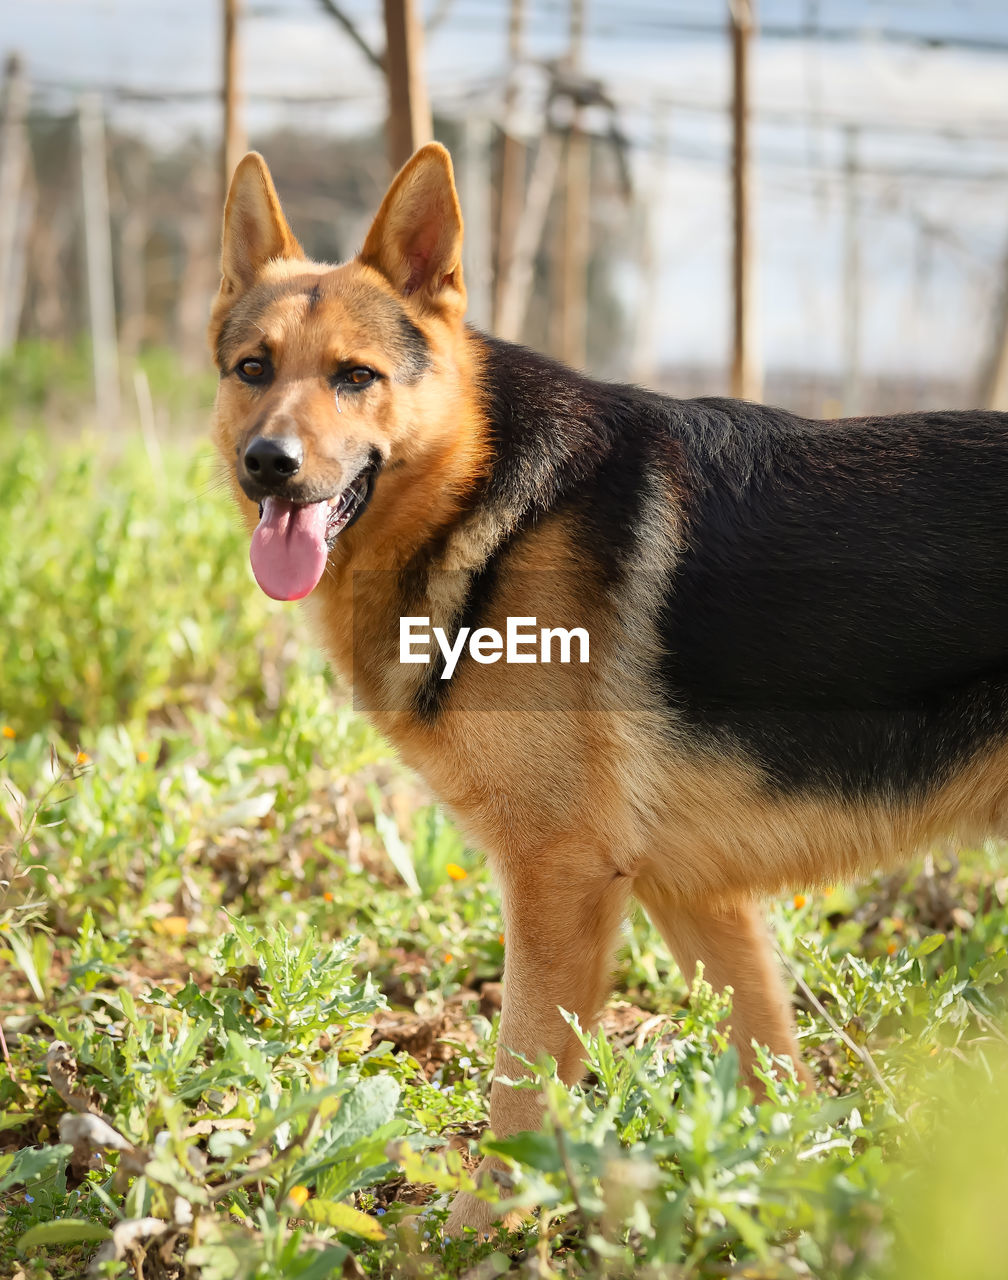 pet, one animal, animal themes, animal, dog, mammal, canine, domestic animals, german shepherd, plant, grass, nature, portrait, no people, day, east-european shepherd, sunlight, outdoors, standing, carnivore, facial expression, sticking out tongue, purebred dog, looking at camera, wolfdog, looking